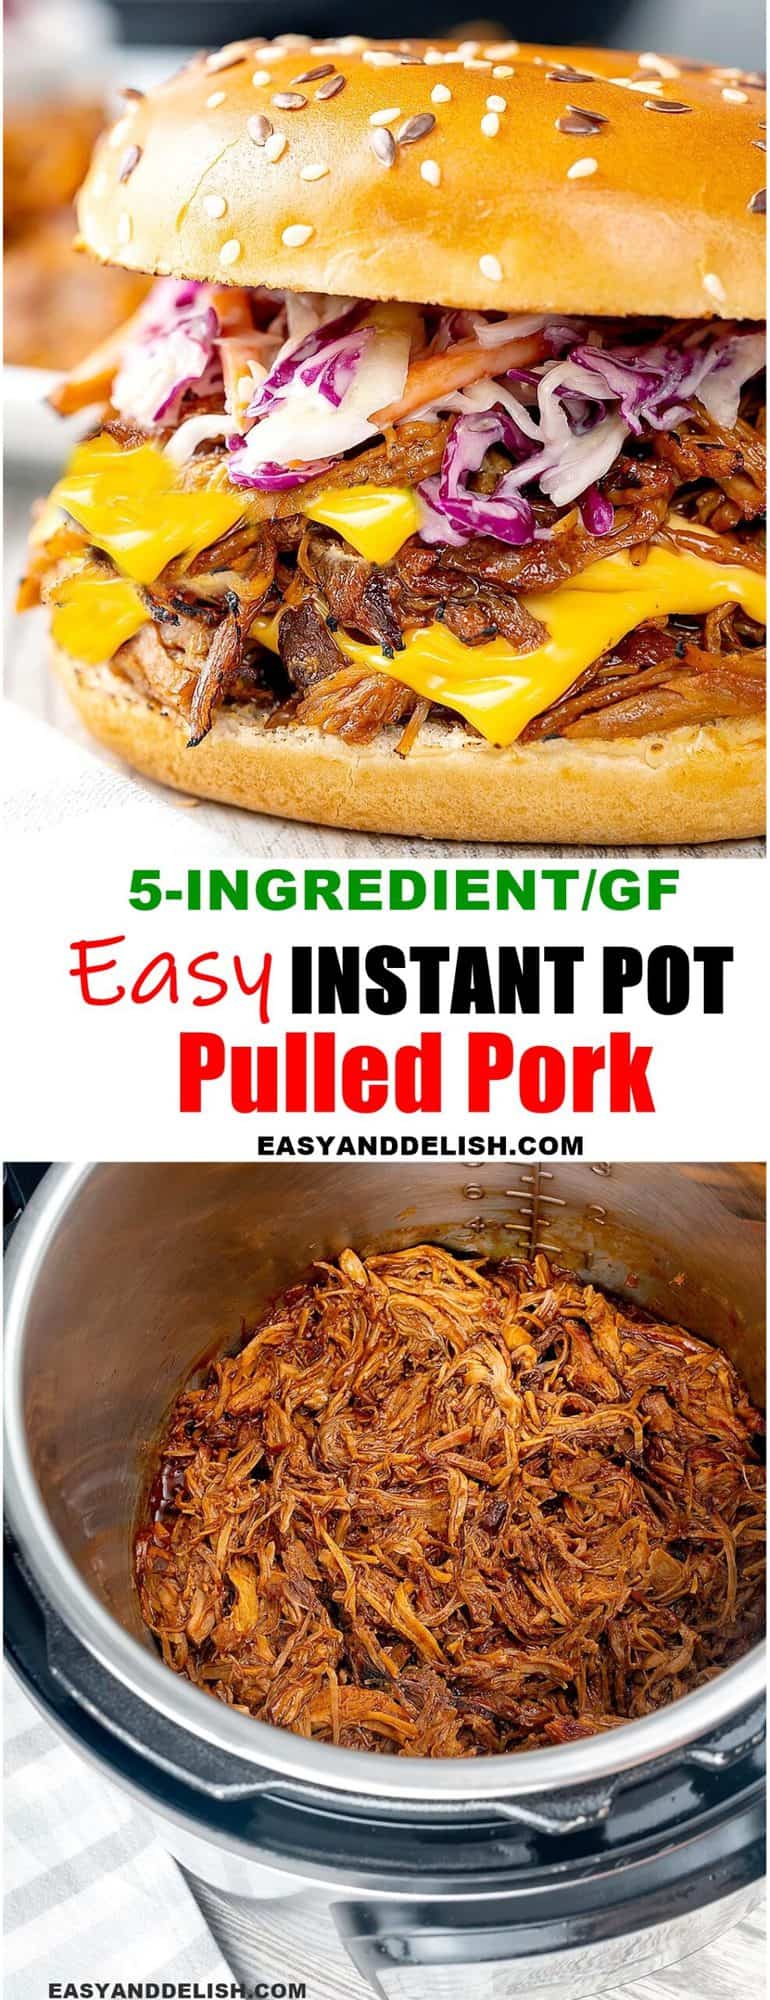 Instant Pot Pulled Pork Recipe - Easy and Delish